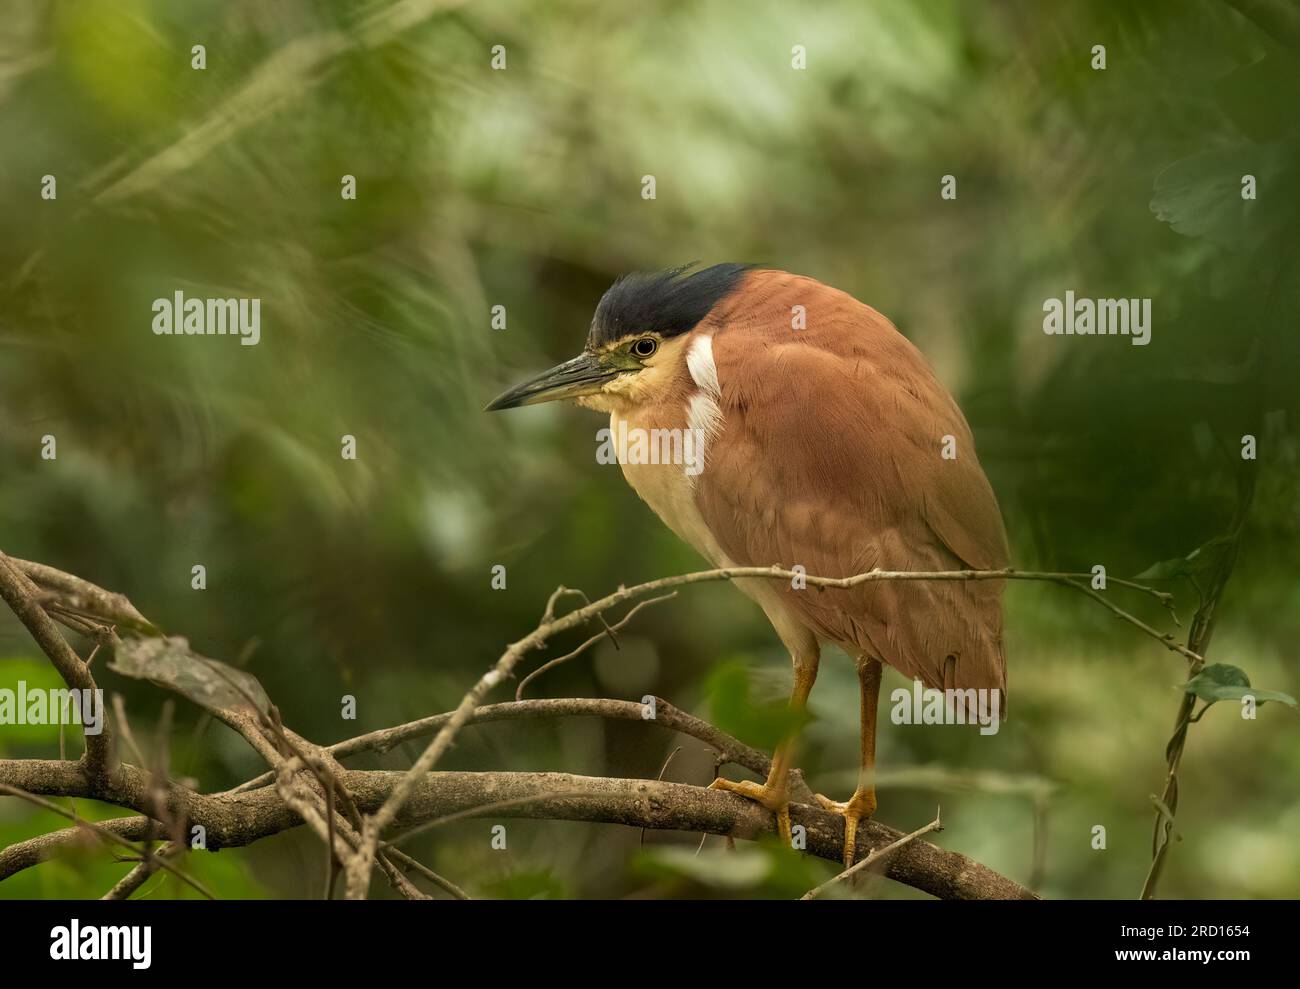 Nankeen Night-heron (Nycticorax caledonicus) is a compact heron with large head and stooped posture. Breeds in colonies, often with egrets. Stock Photo